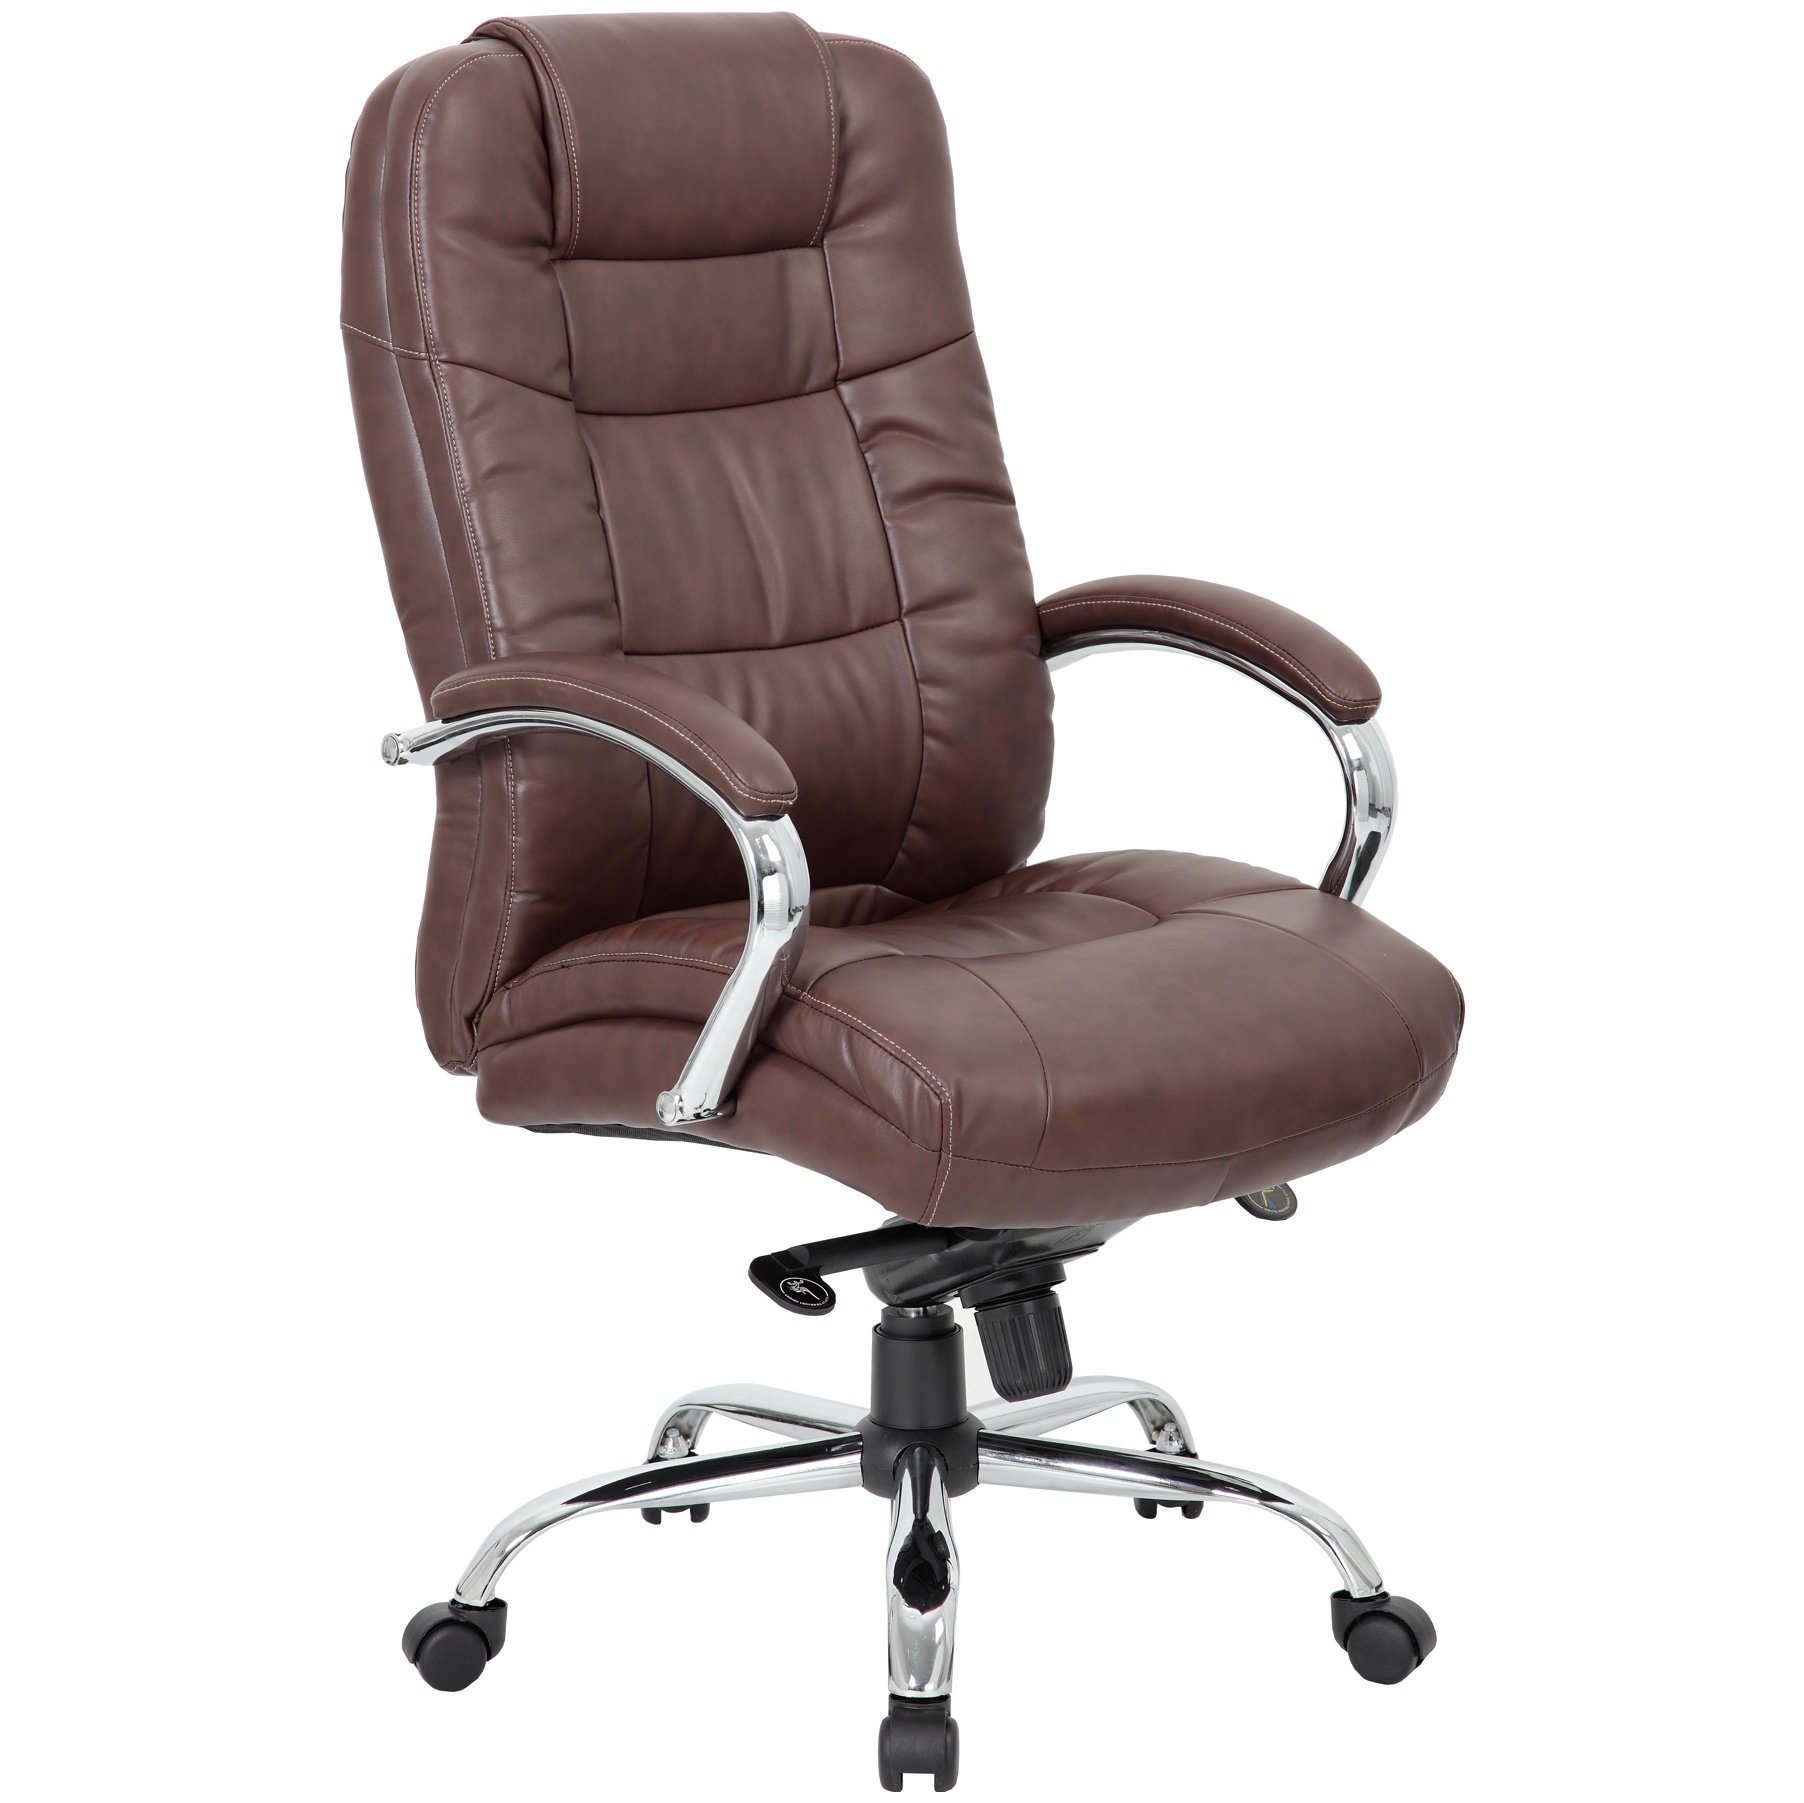 Verona High Back Leather Executive, Brown Leather Desk Chairs Uk